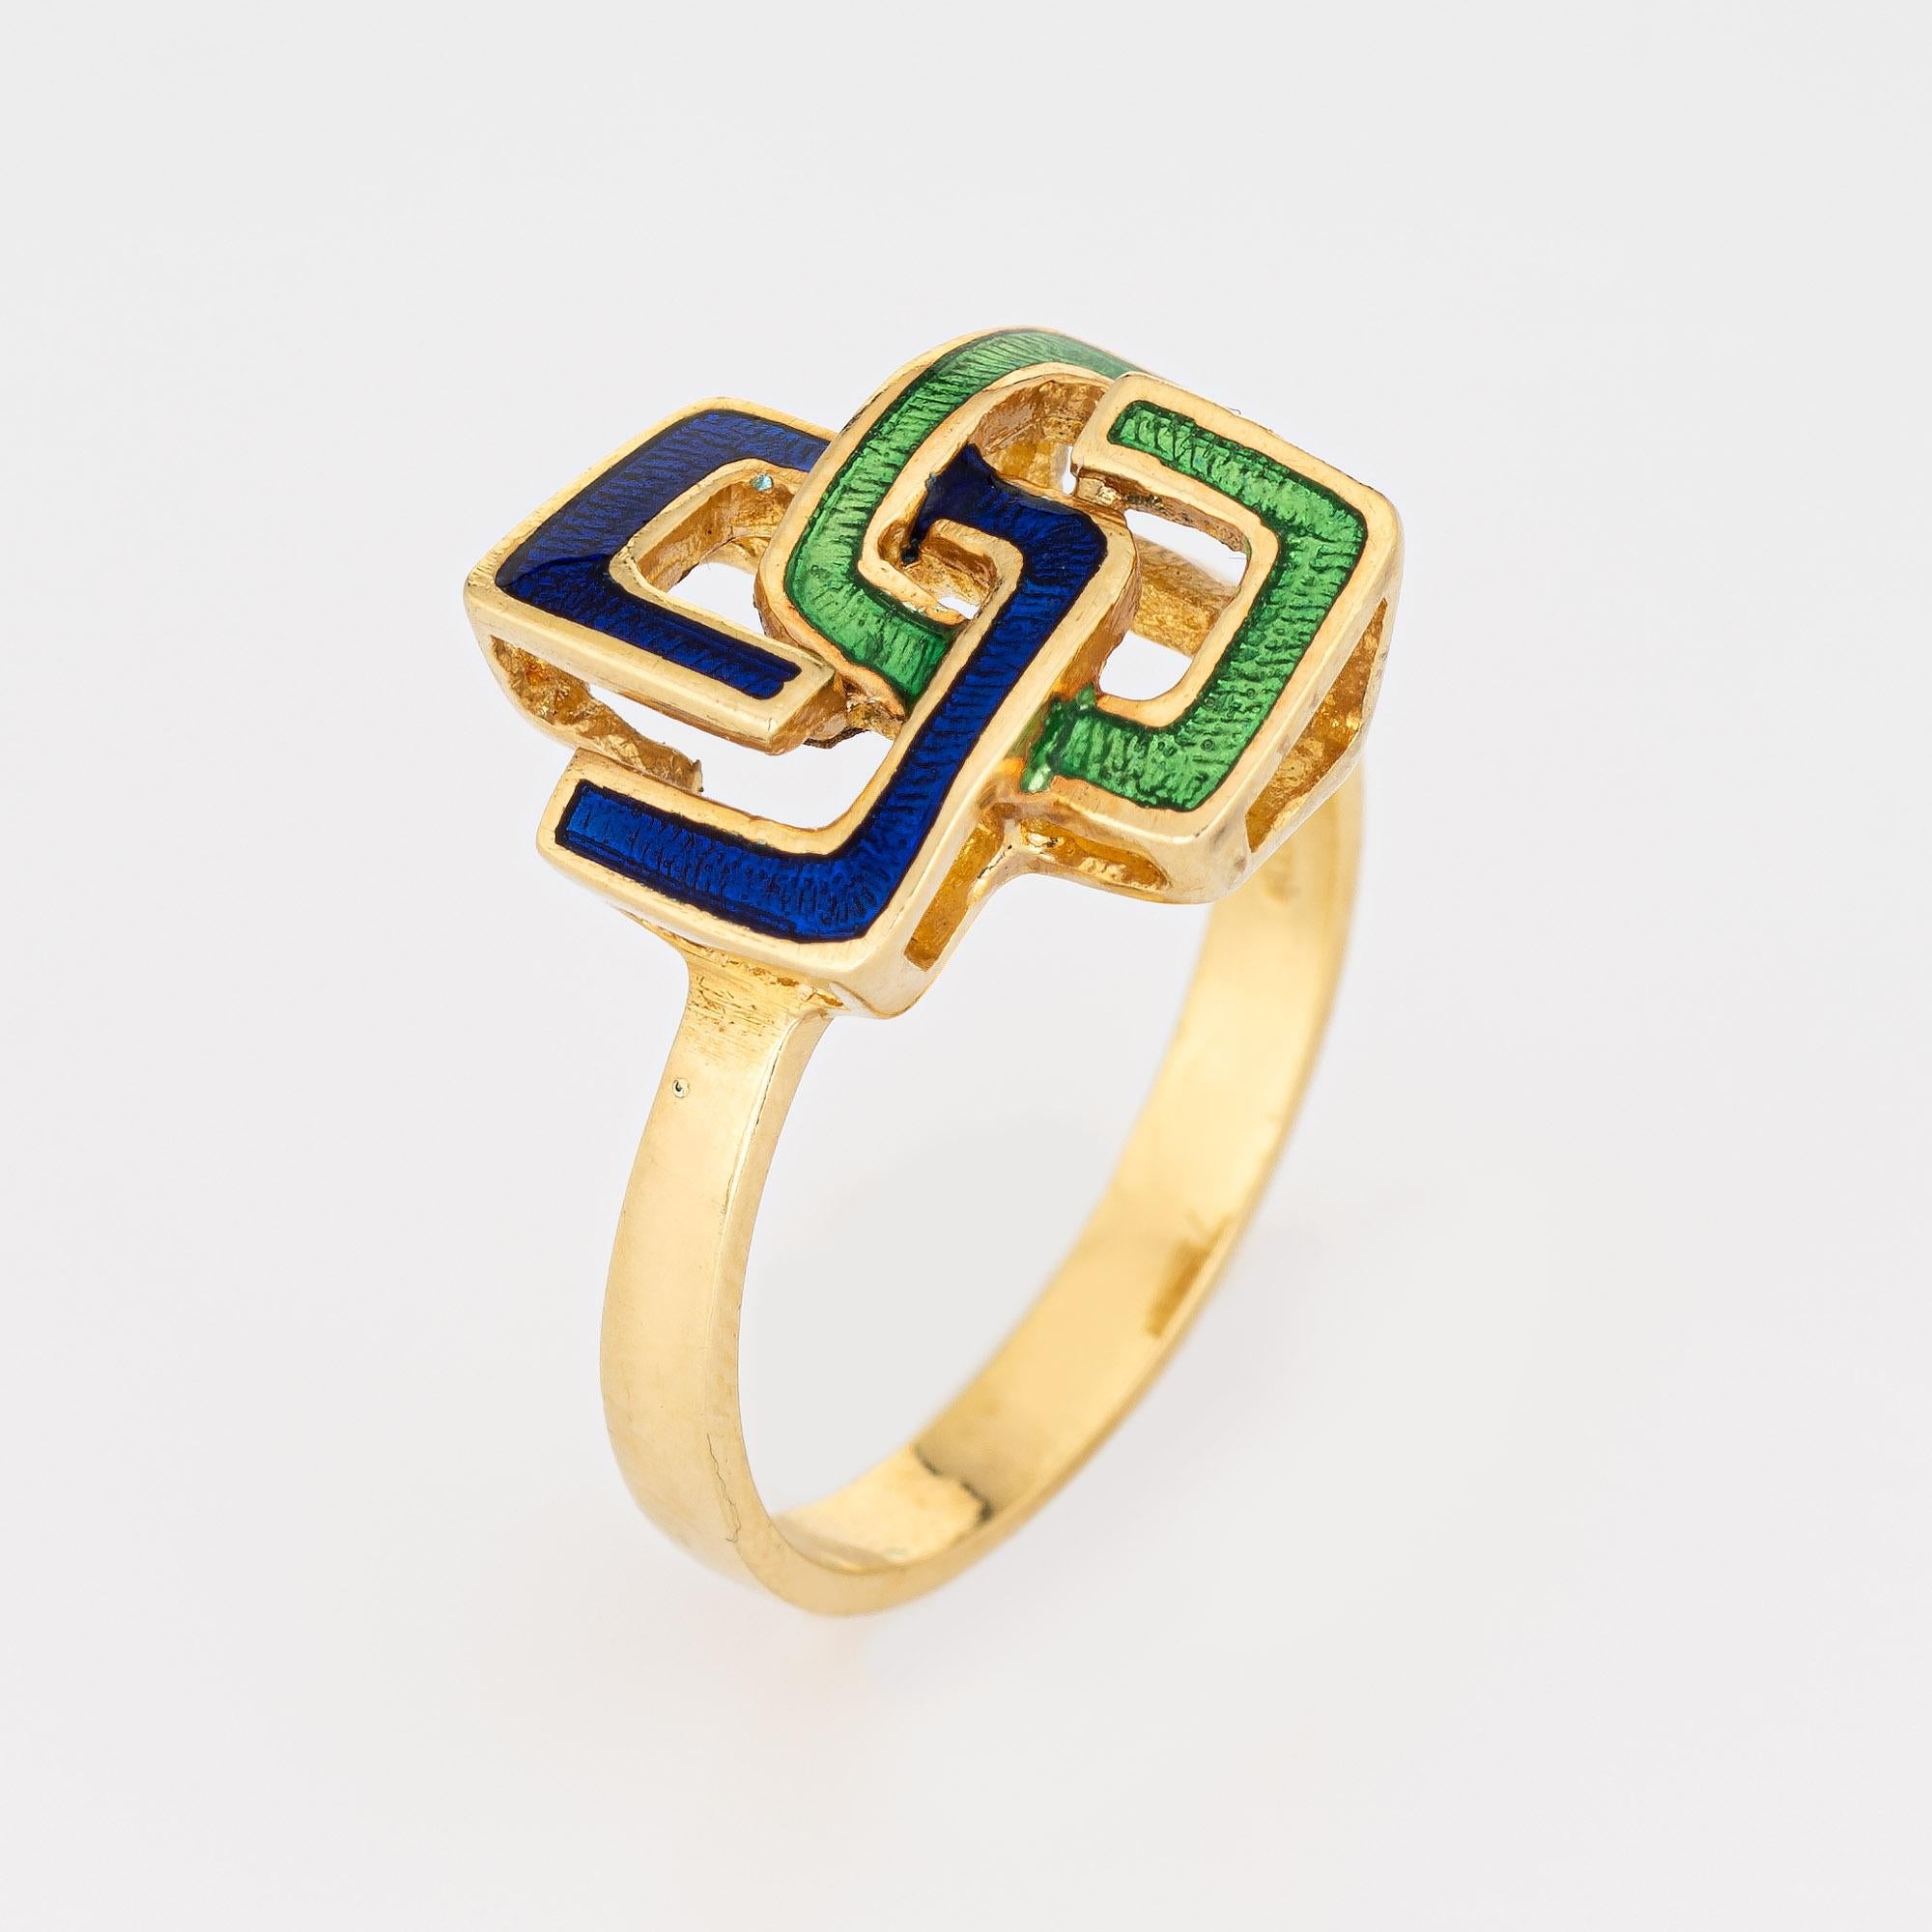 Stylish interlocking square infinity ring (circa 1960s to 1970s), crafted in 18 karat yellow gold. 

Green and blue enamel is set into the interlocking squares. Great for wear alone or stacked with your fine jewelry from any era.

The ring is in